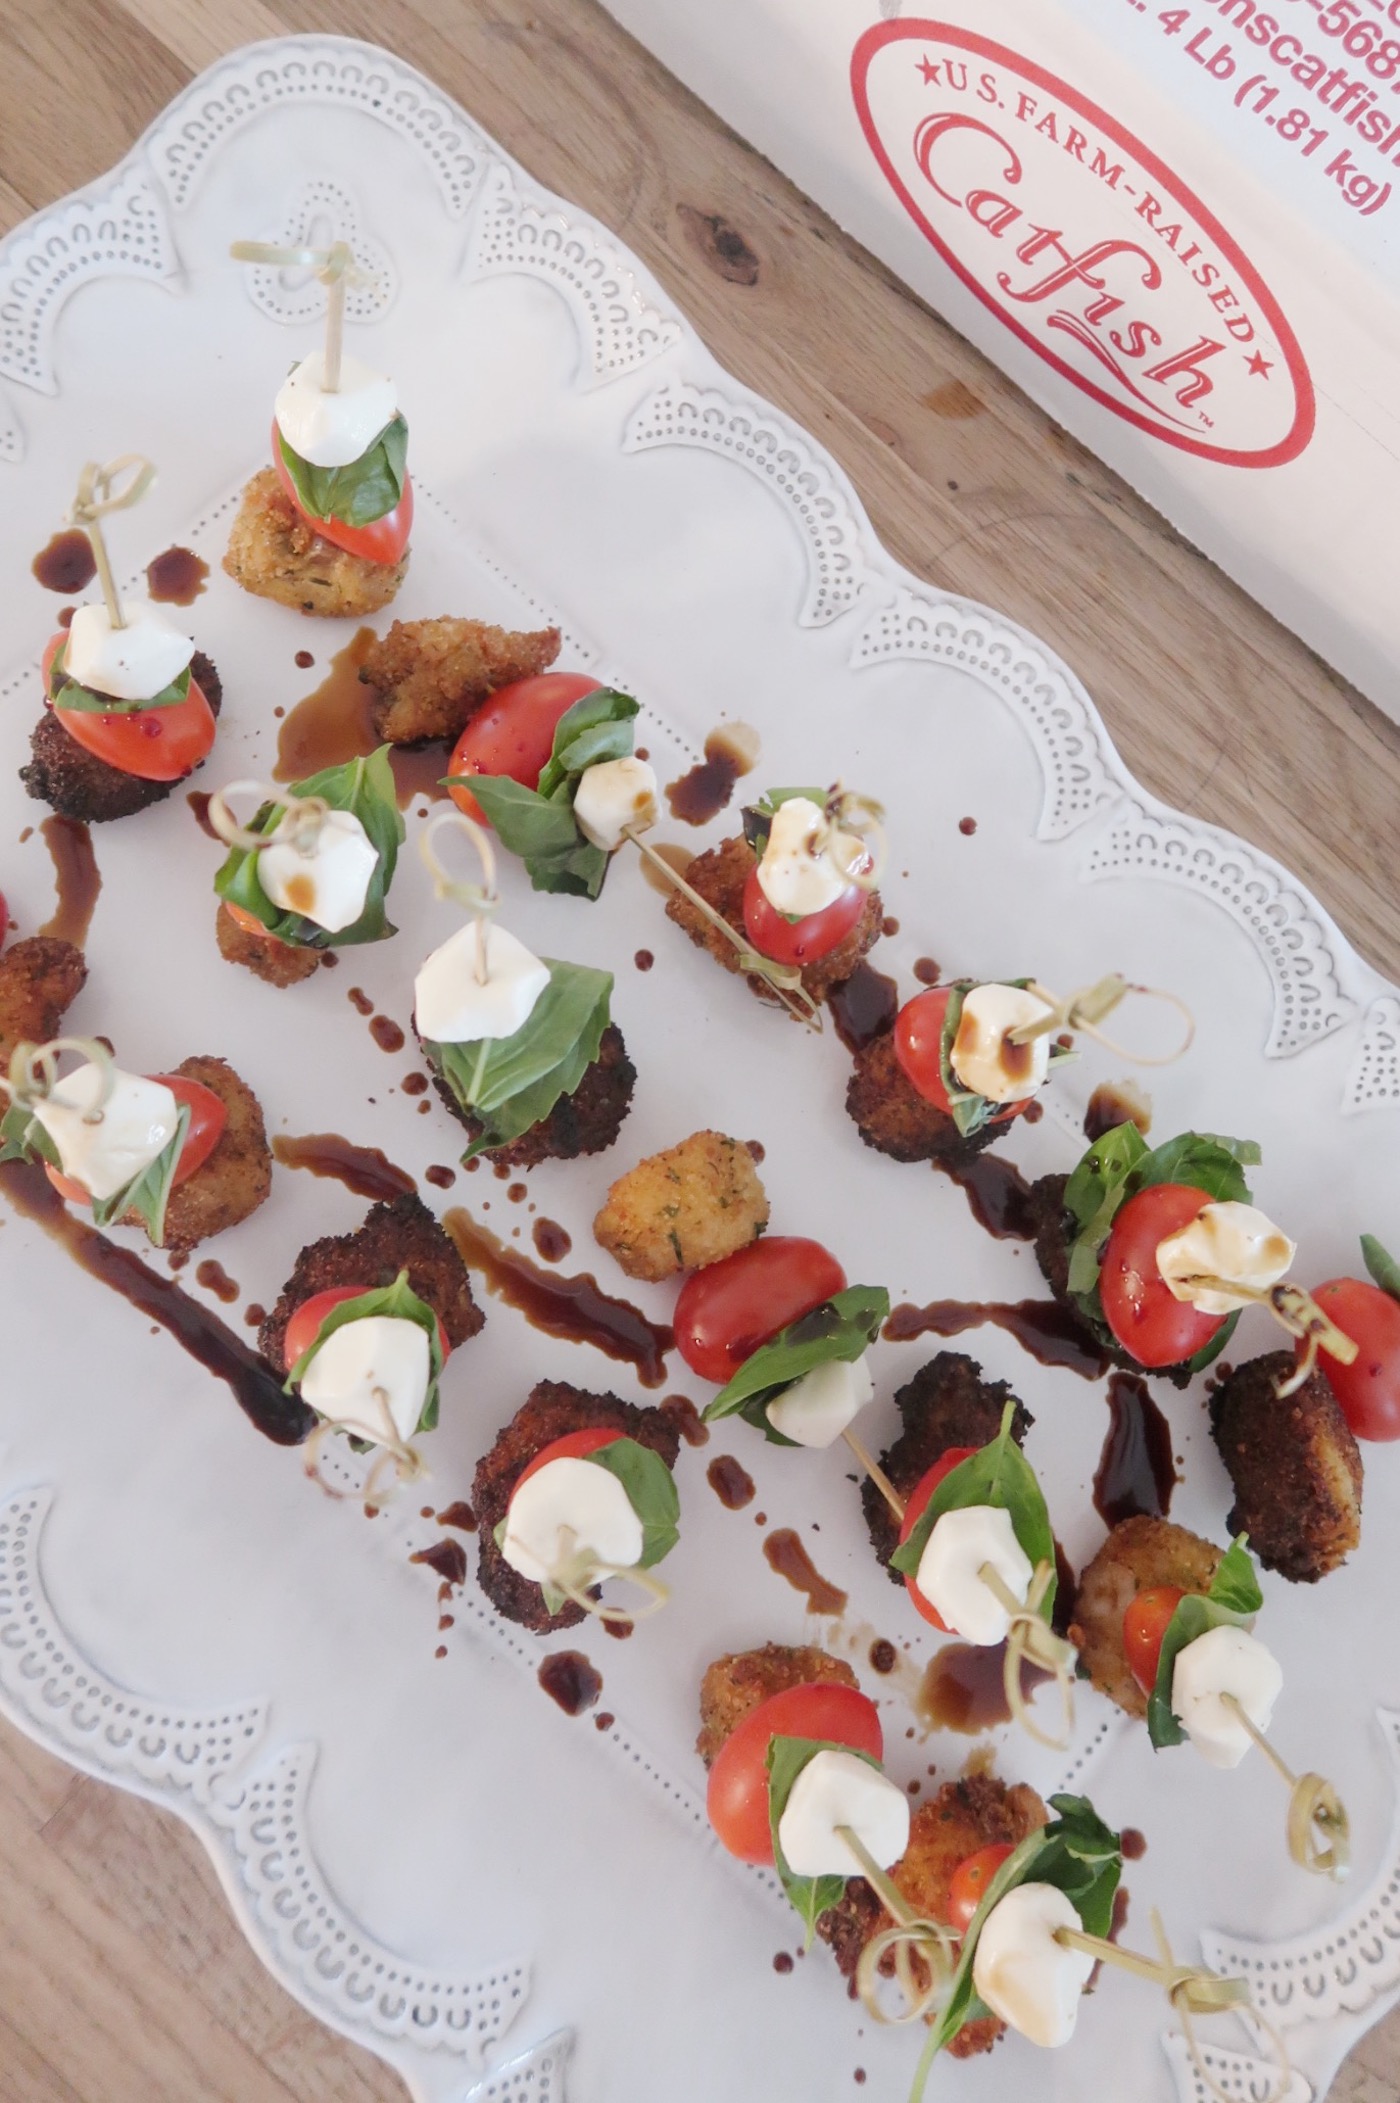 U.S. Farm-Raised Catfish Caprese Skewer appetizer recipe // SO EASY and absolutely delicious!